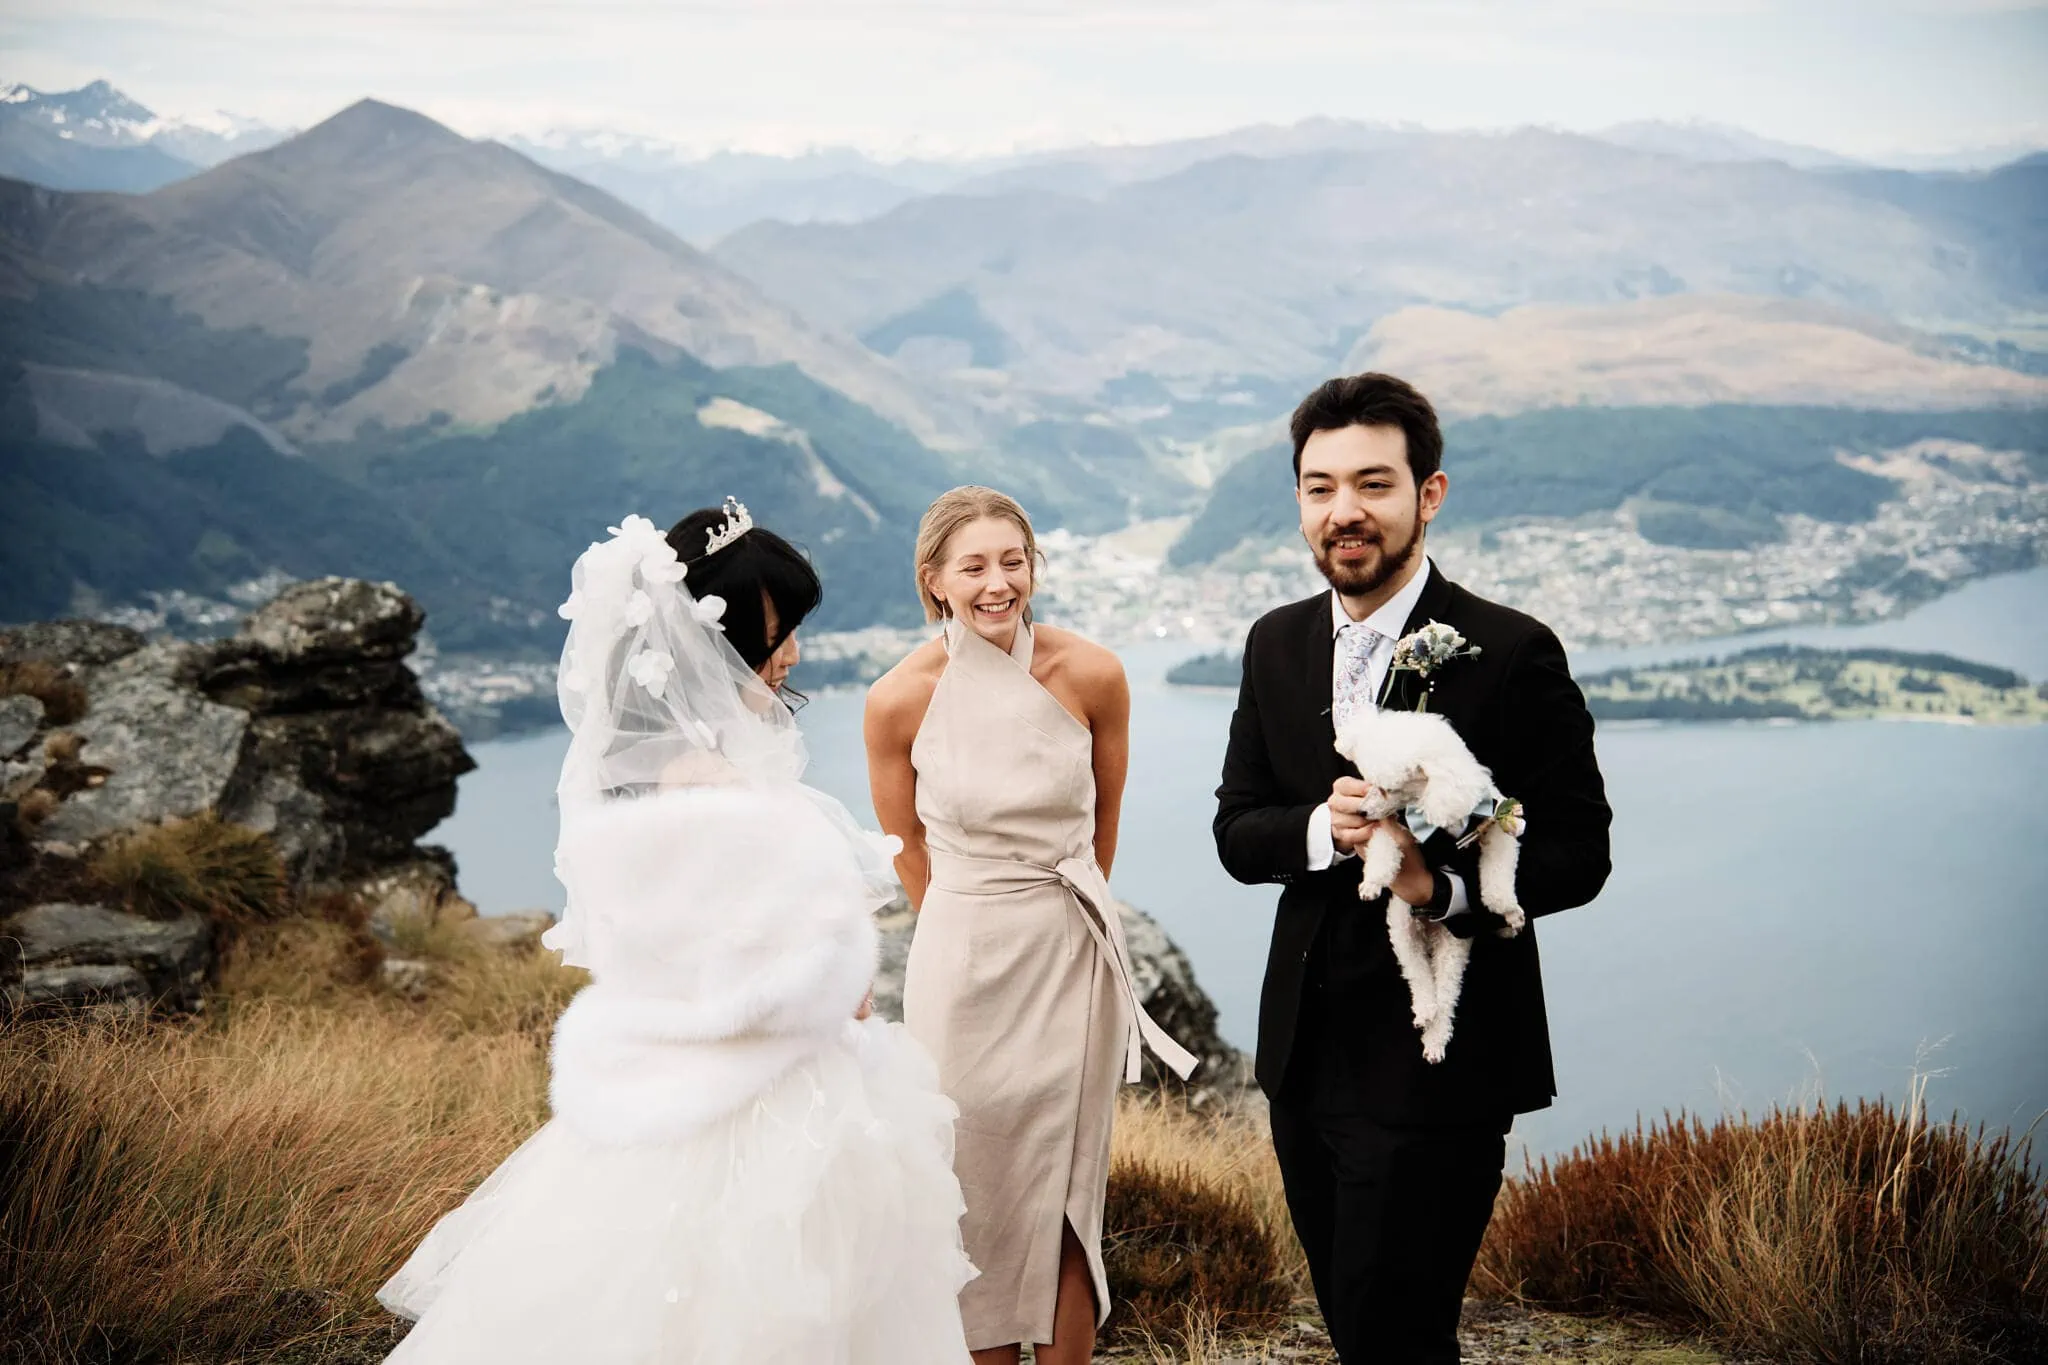 Carlos and Wanzhu's intimate elopement wedding on top of Cecil Peak, overlooking Lake Wanaka.